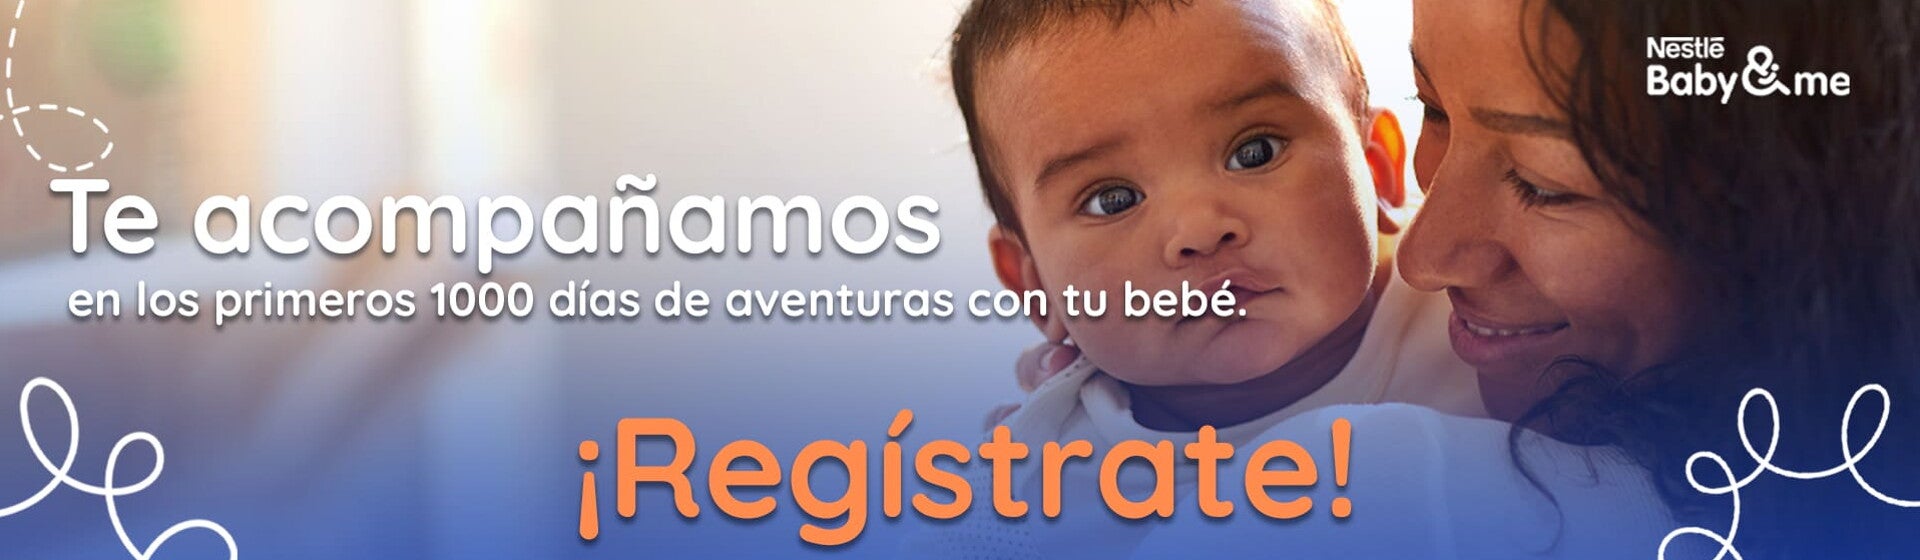 banner registrate baby and me